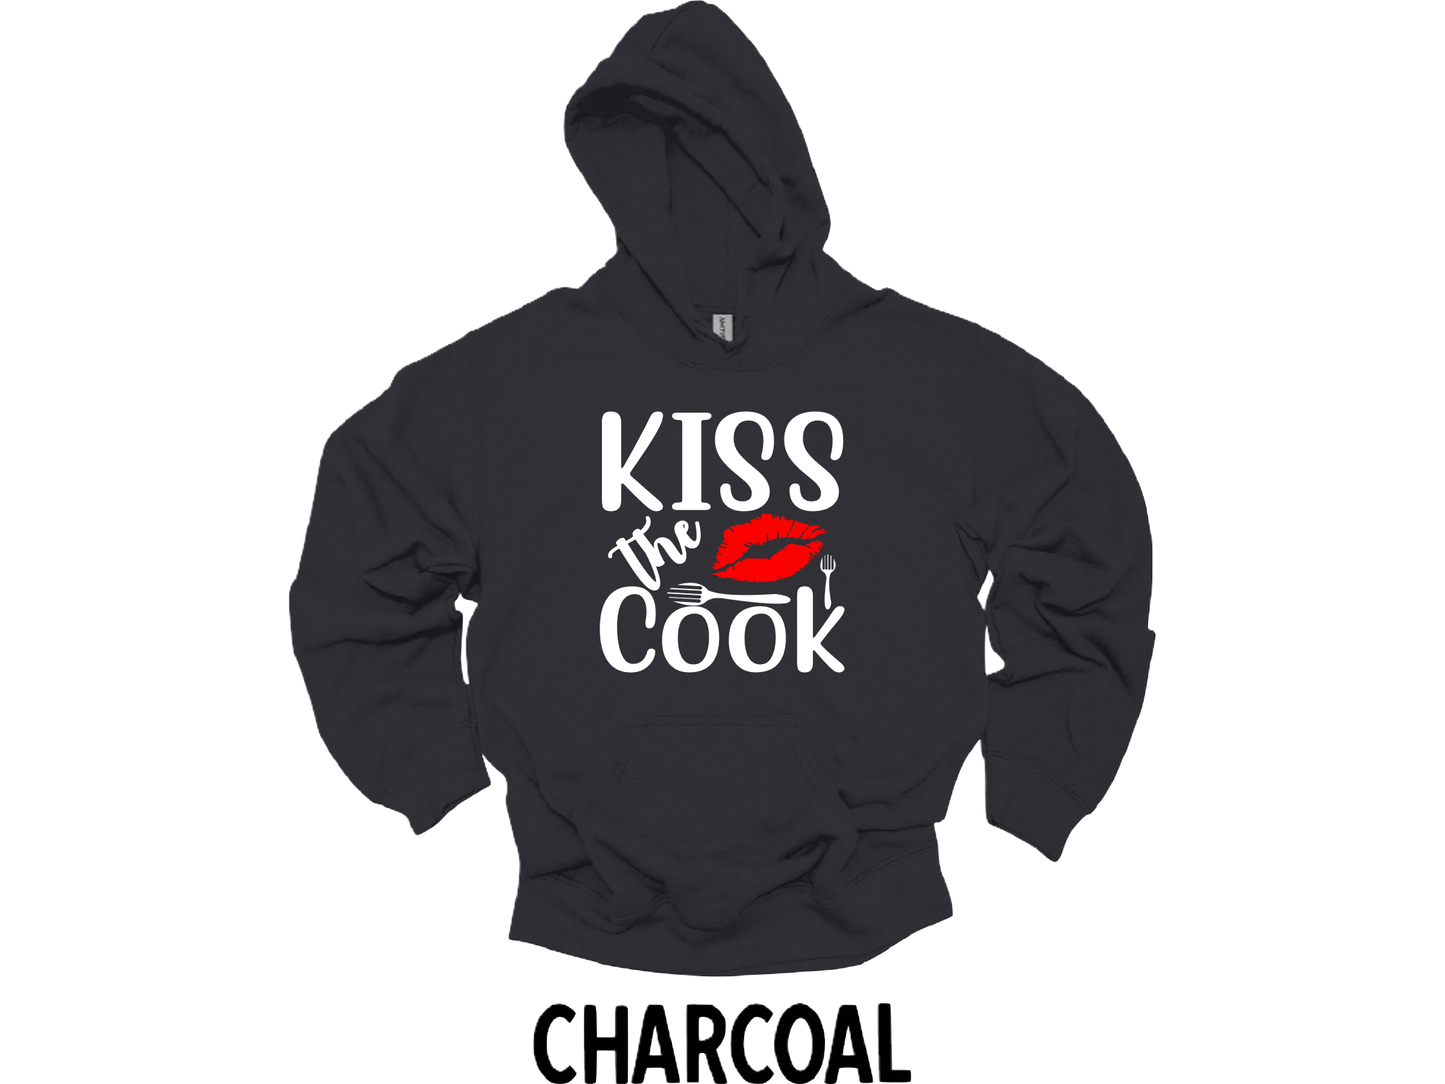 Kiss the cook t-shirt or hoodie (New Arrival)